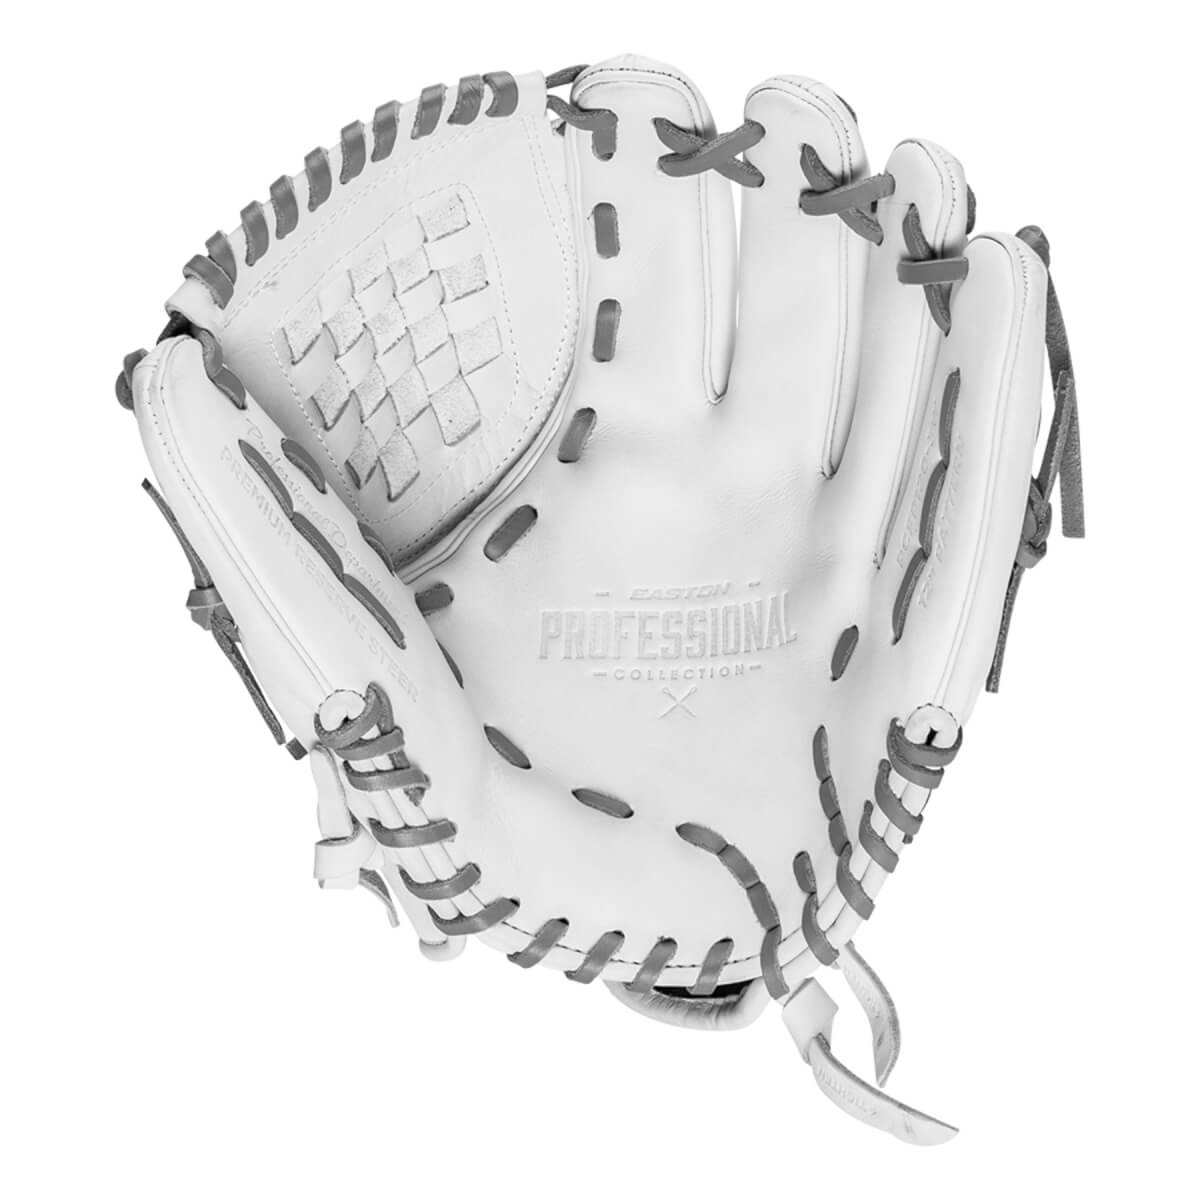 Easton Pro Collection 12" Fastpitch Softball Glove - PCFP120-3W